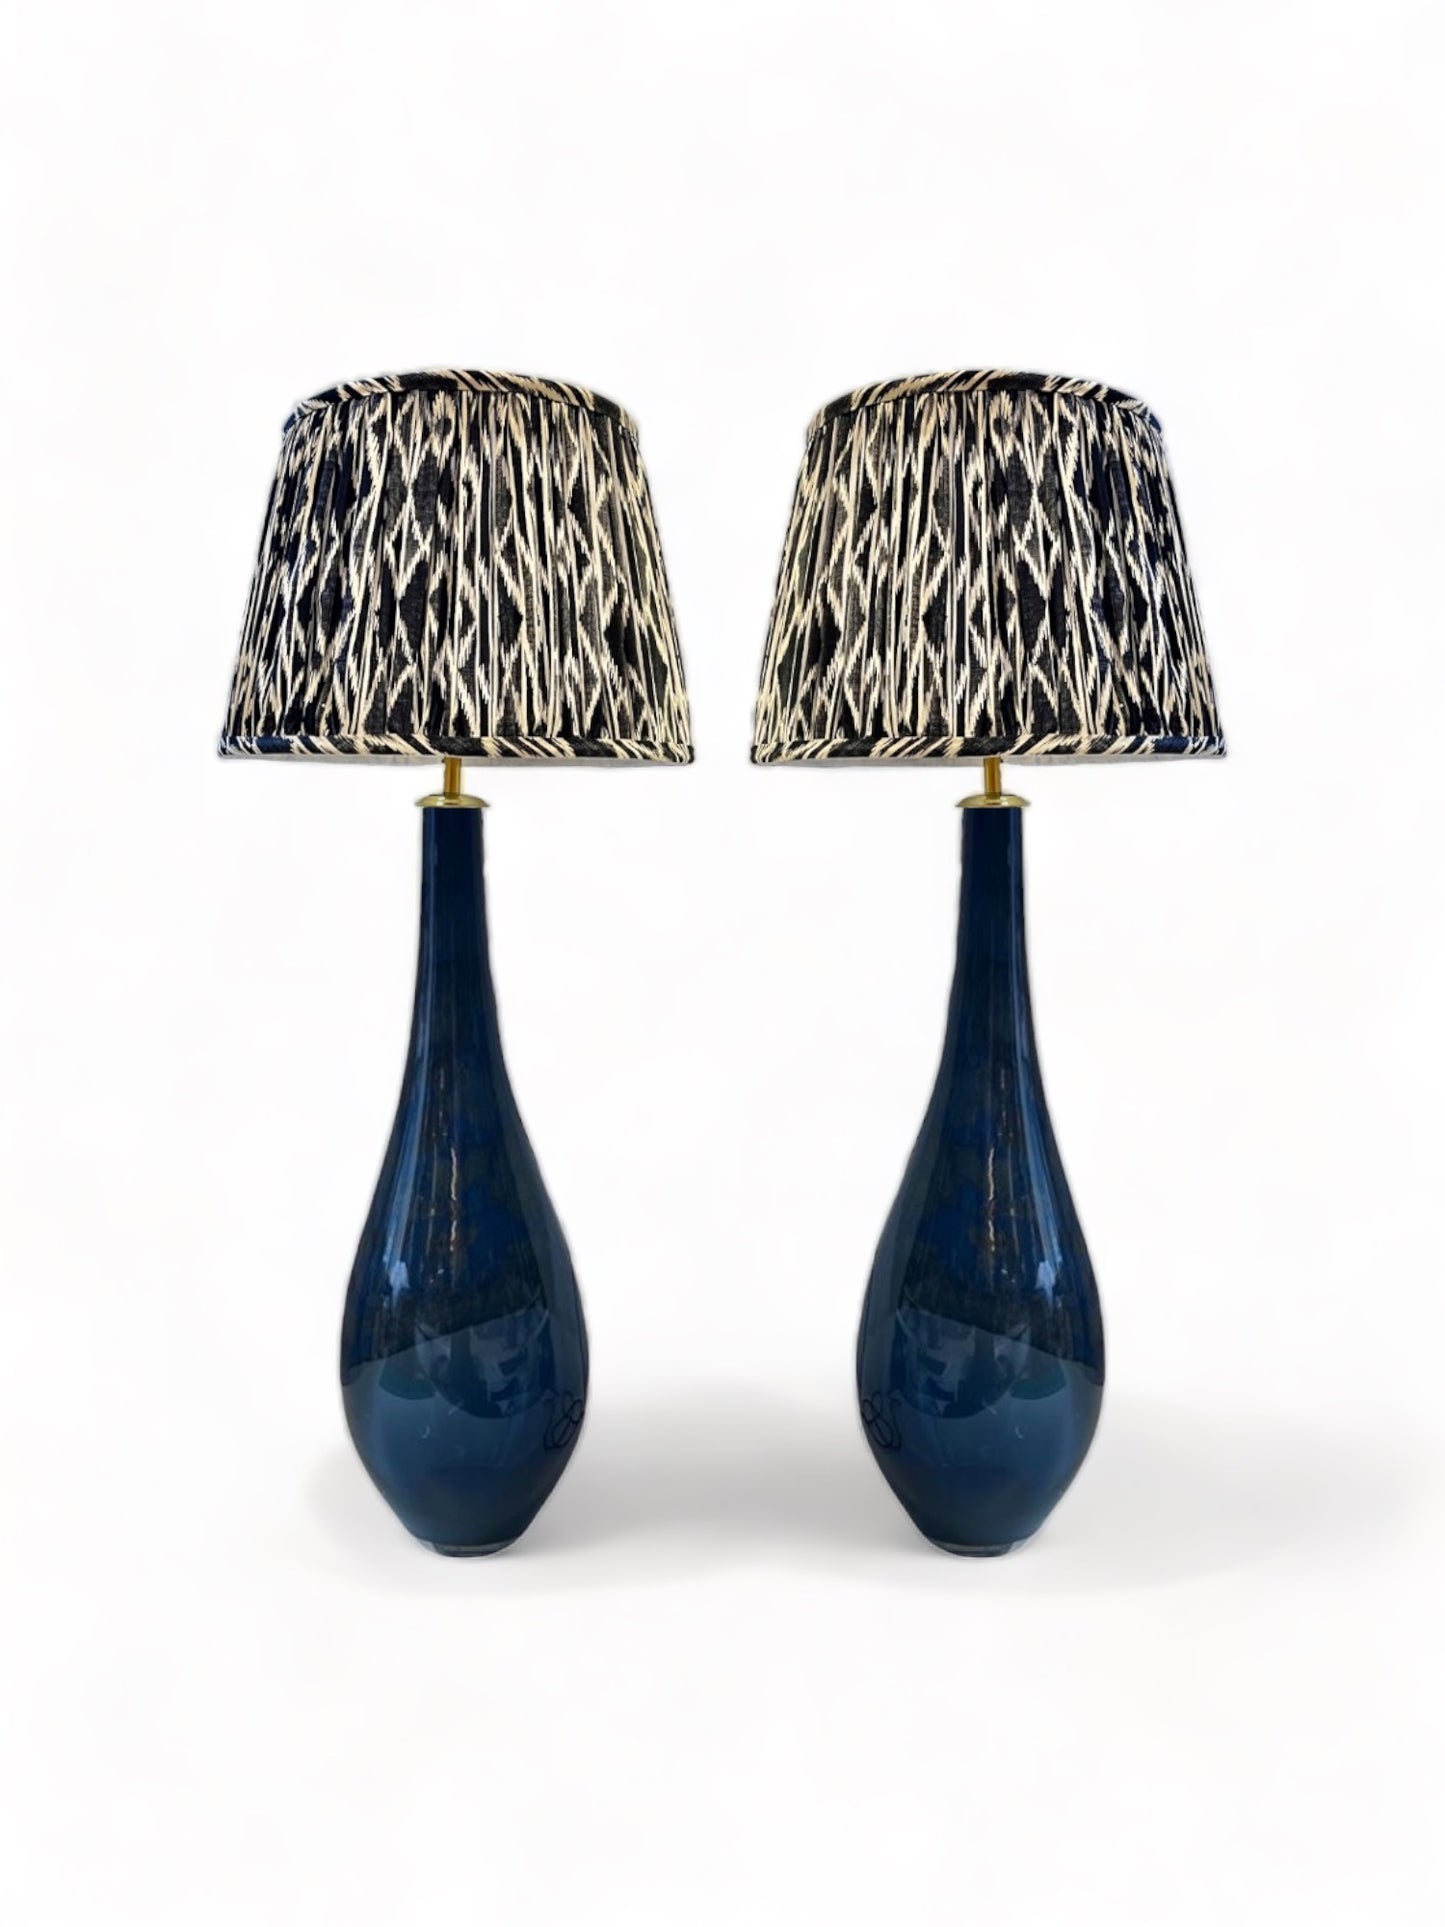 Pair of Lamps with Ikat Shade and Retro Navy Glass Base